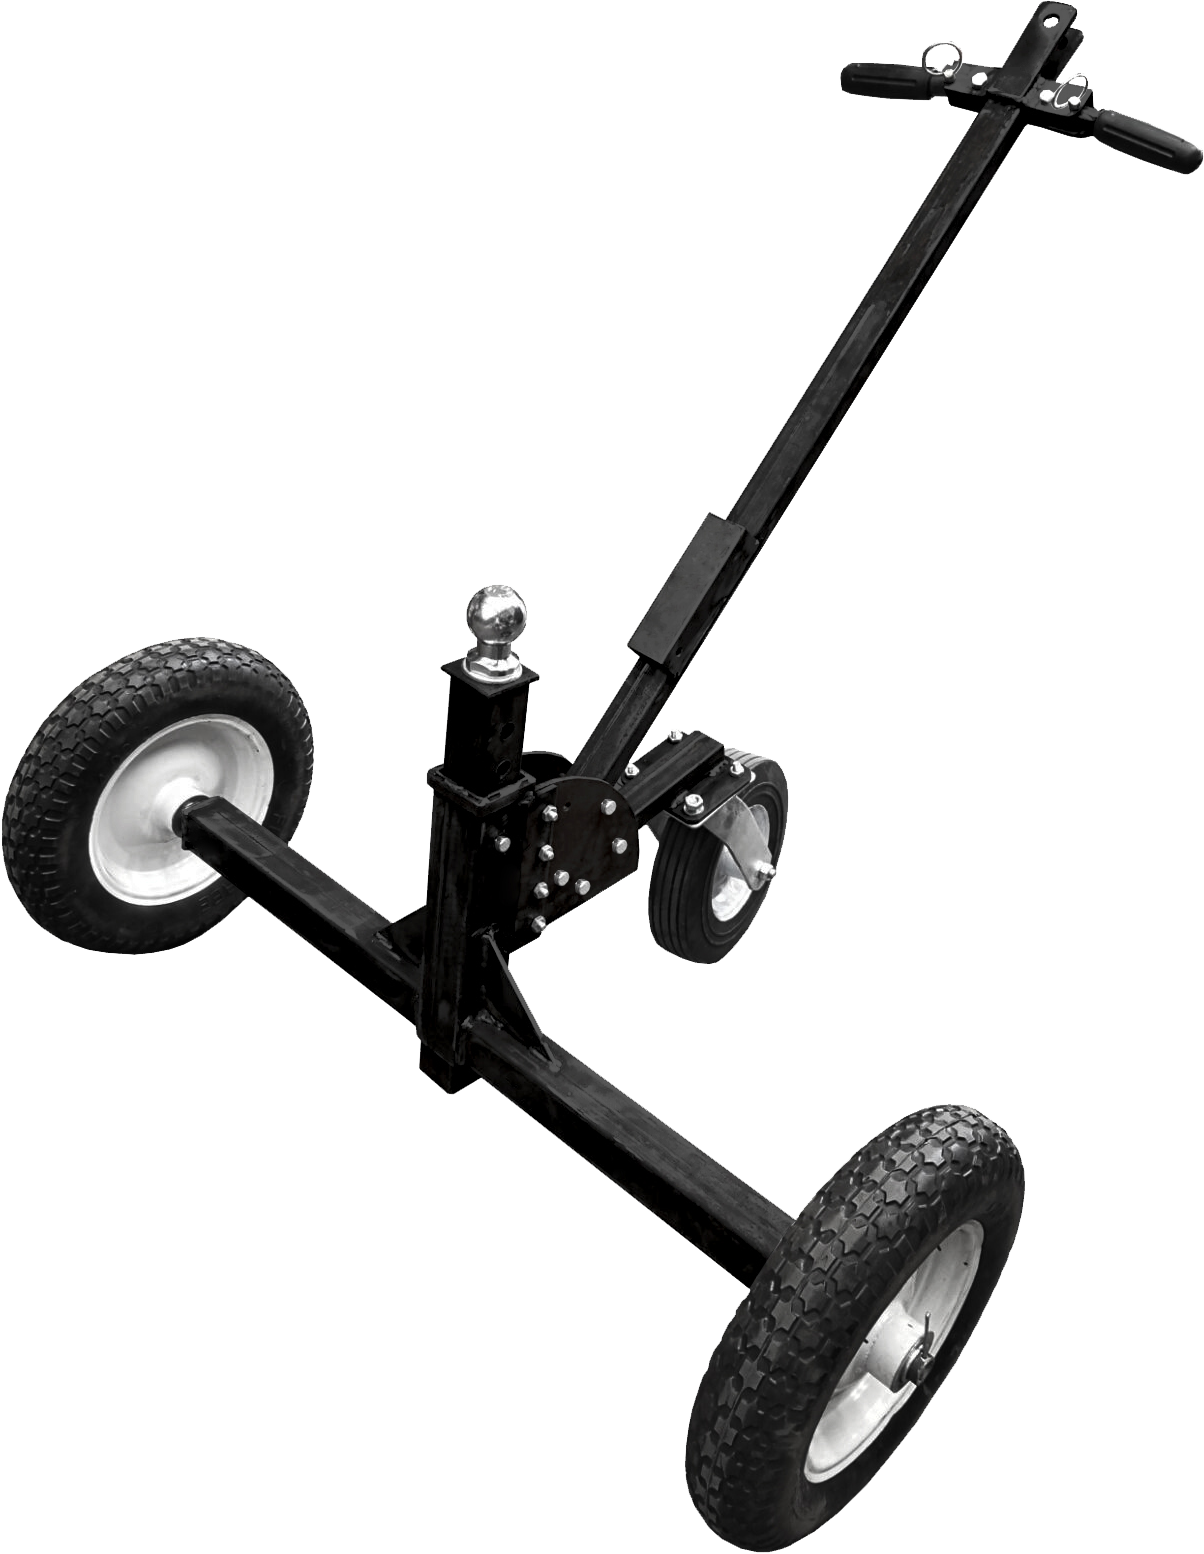 Tow Tuff TMD-1000CATV 2-In-1 Trailer Dolly Adjustable 21